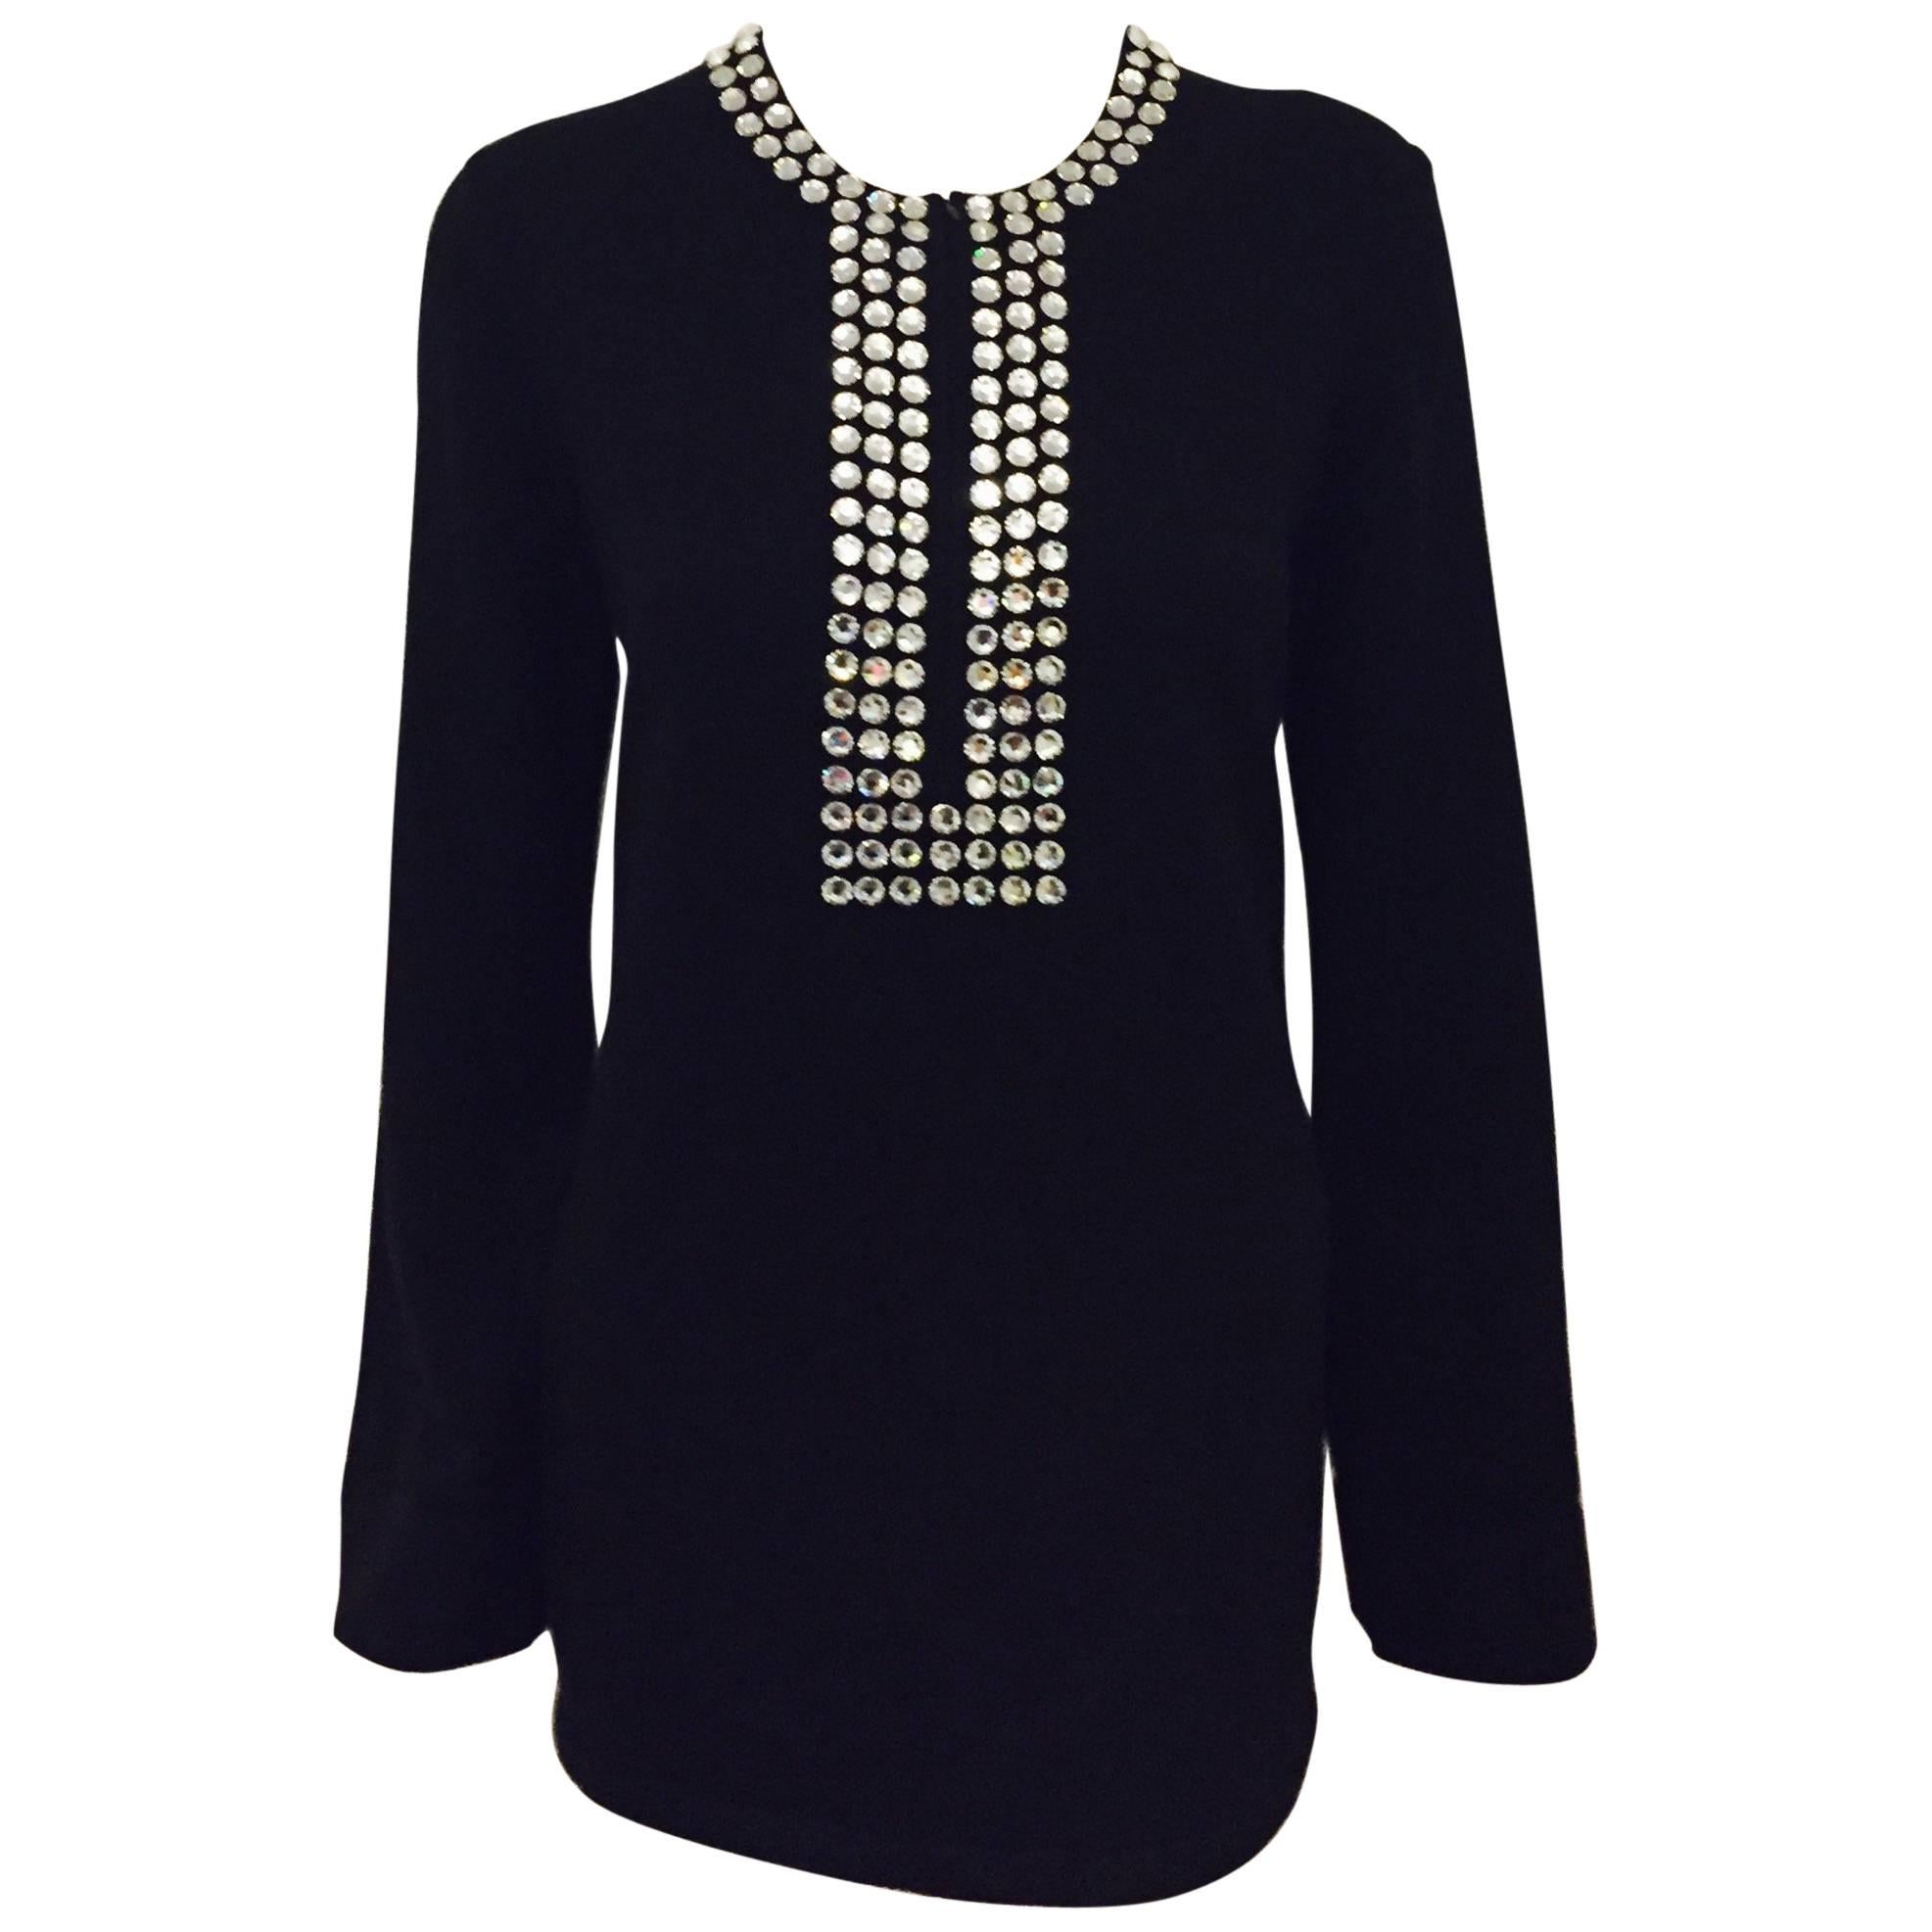 Marvelous Michael Kors Black Cashmere Sweater with Crystal Adornment on Neckline